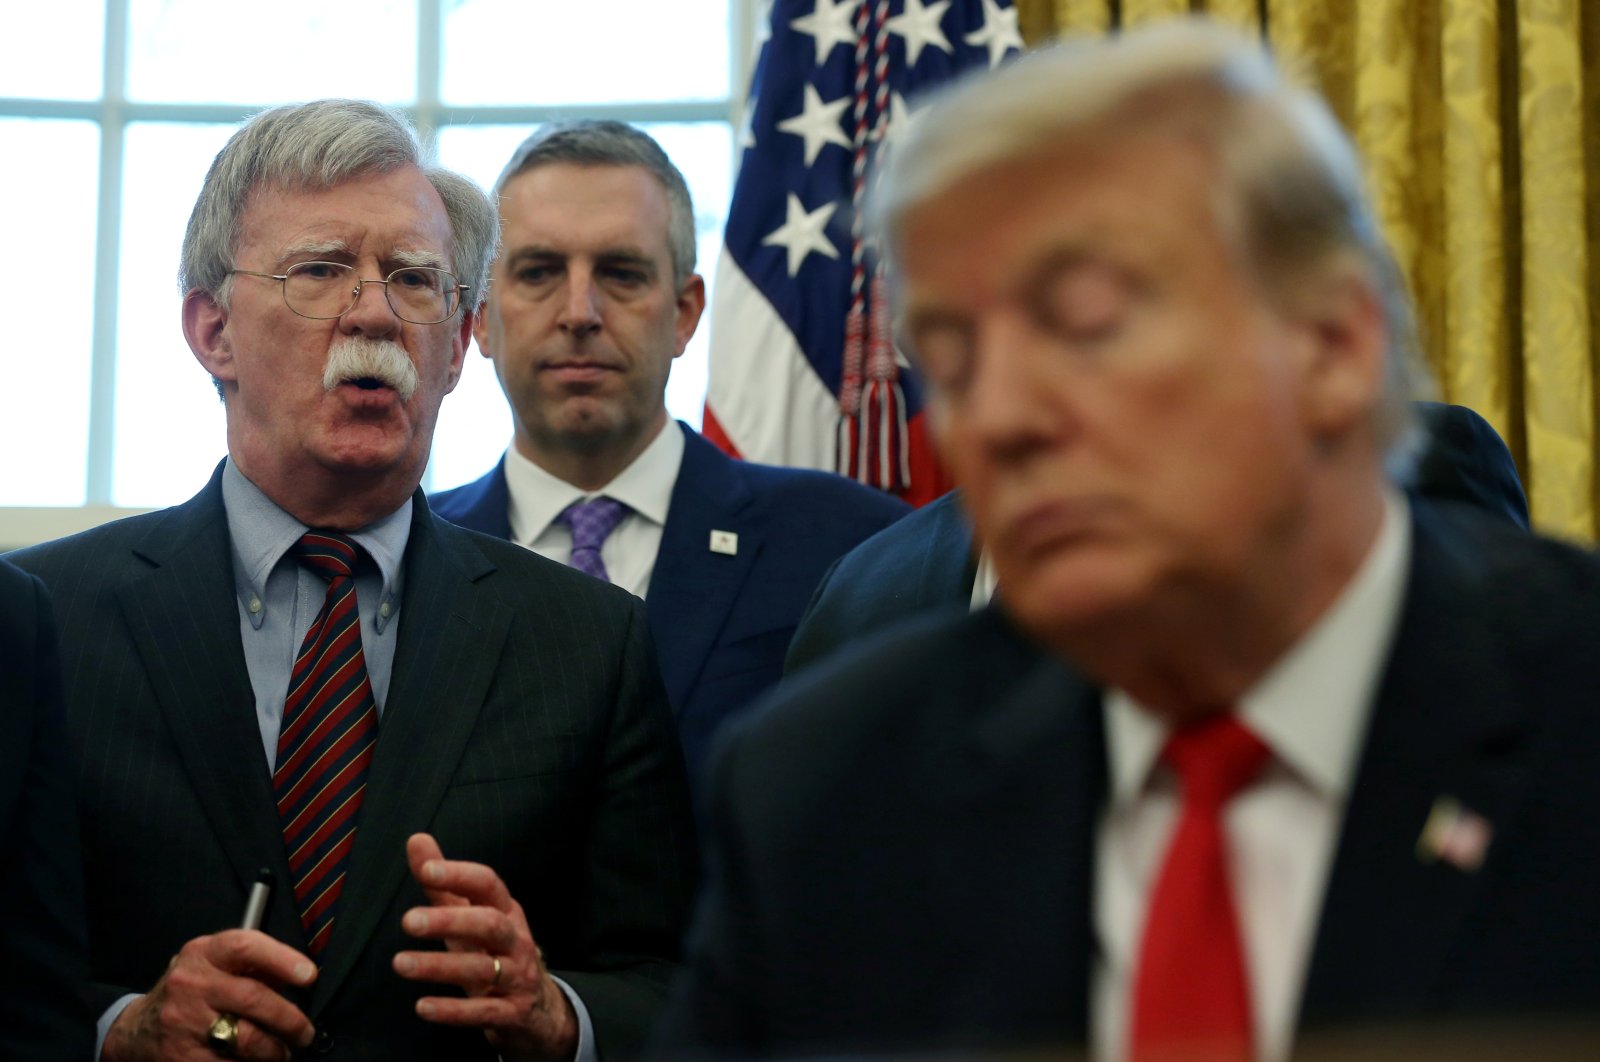 U.S. President Donald Trump listens as his national security adviser John Bolton speaks during a presidential memorandum signing for the &quot;Women&#039;s Global Development and Prosperity&quot; initiative in the Oval Office at the White House in Washington, U.S., Feb. 7, 2019. (Reuters Photo)